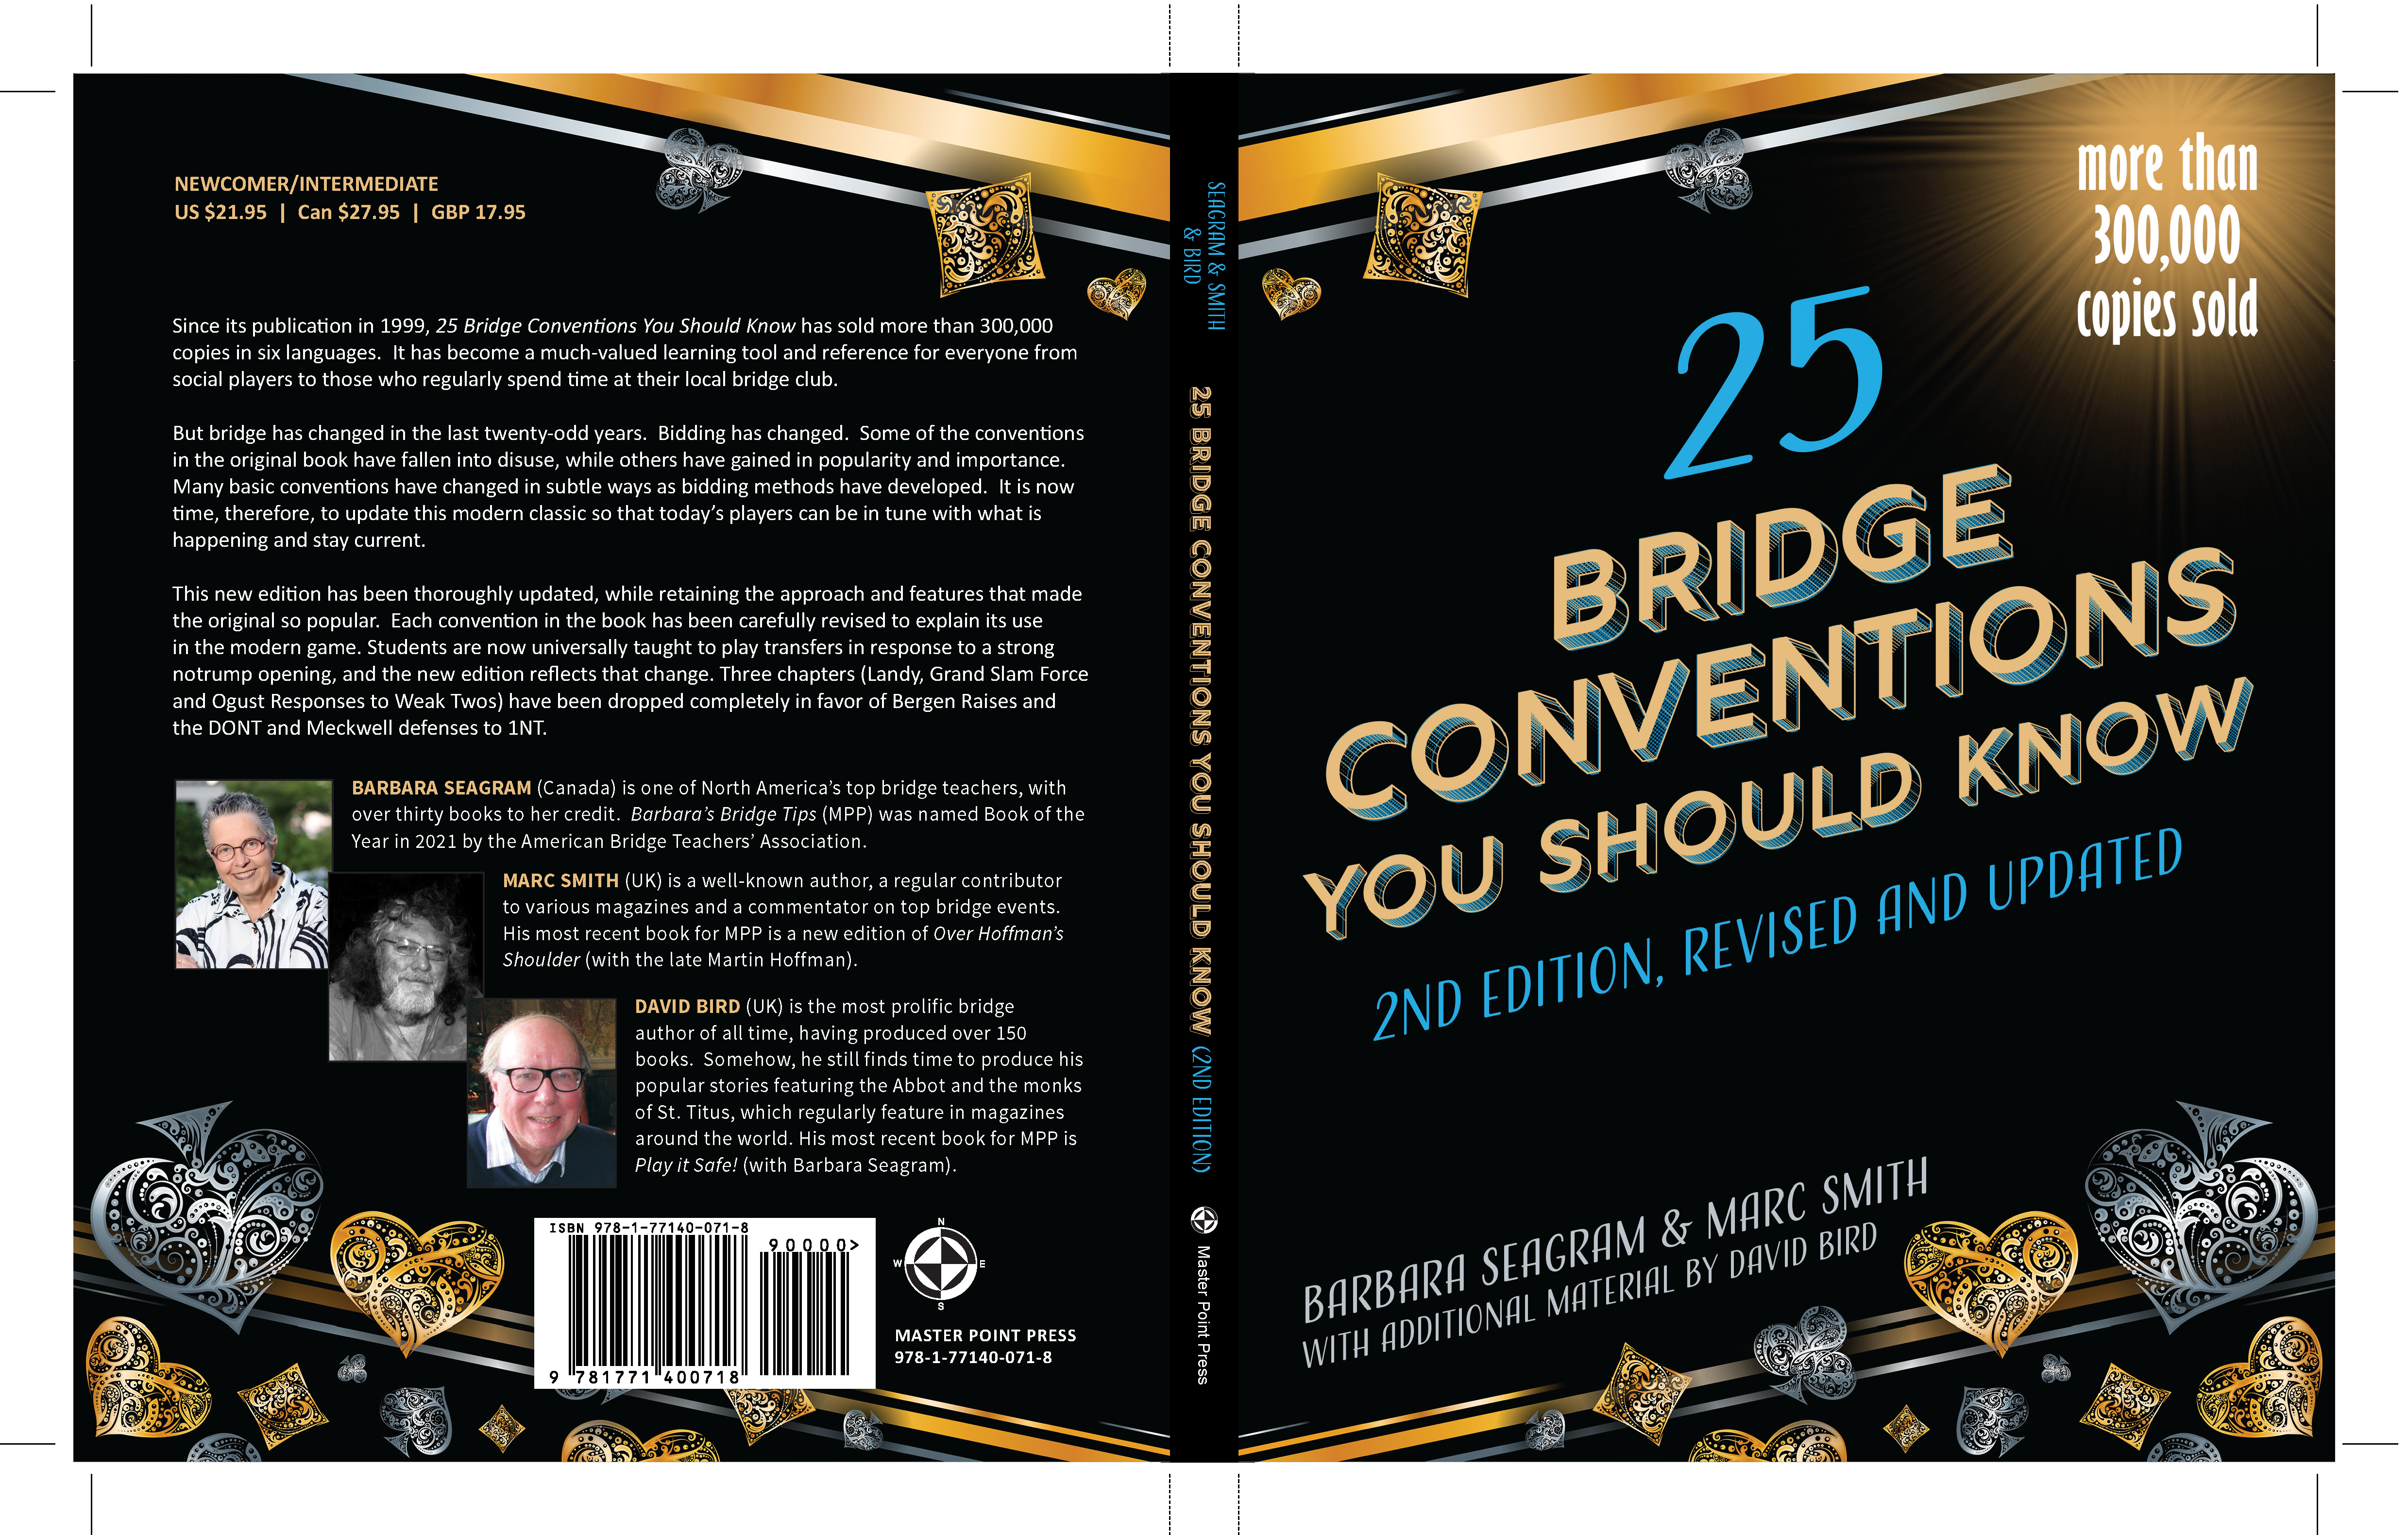 Available now : revised version of Beginning Bridge Book One